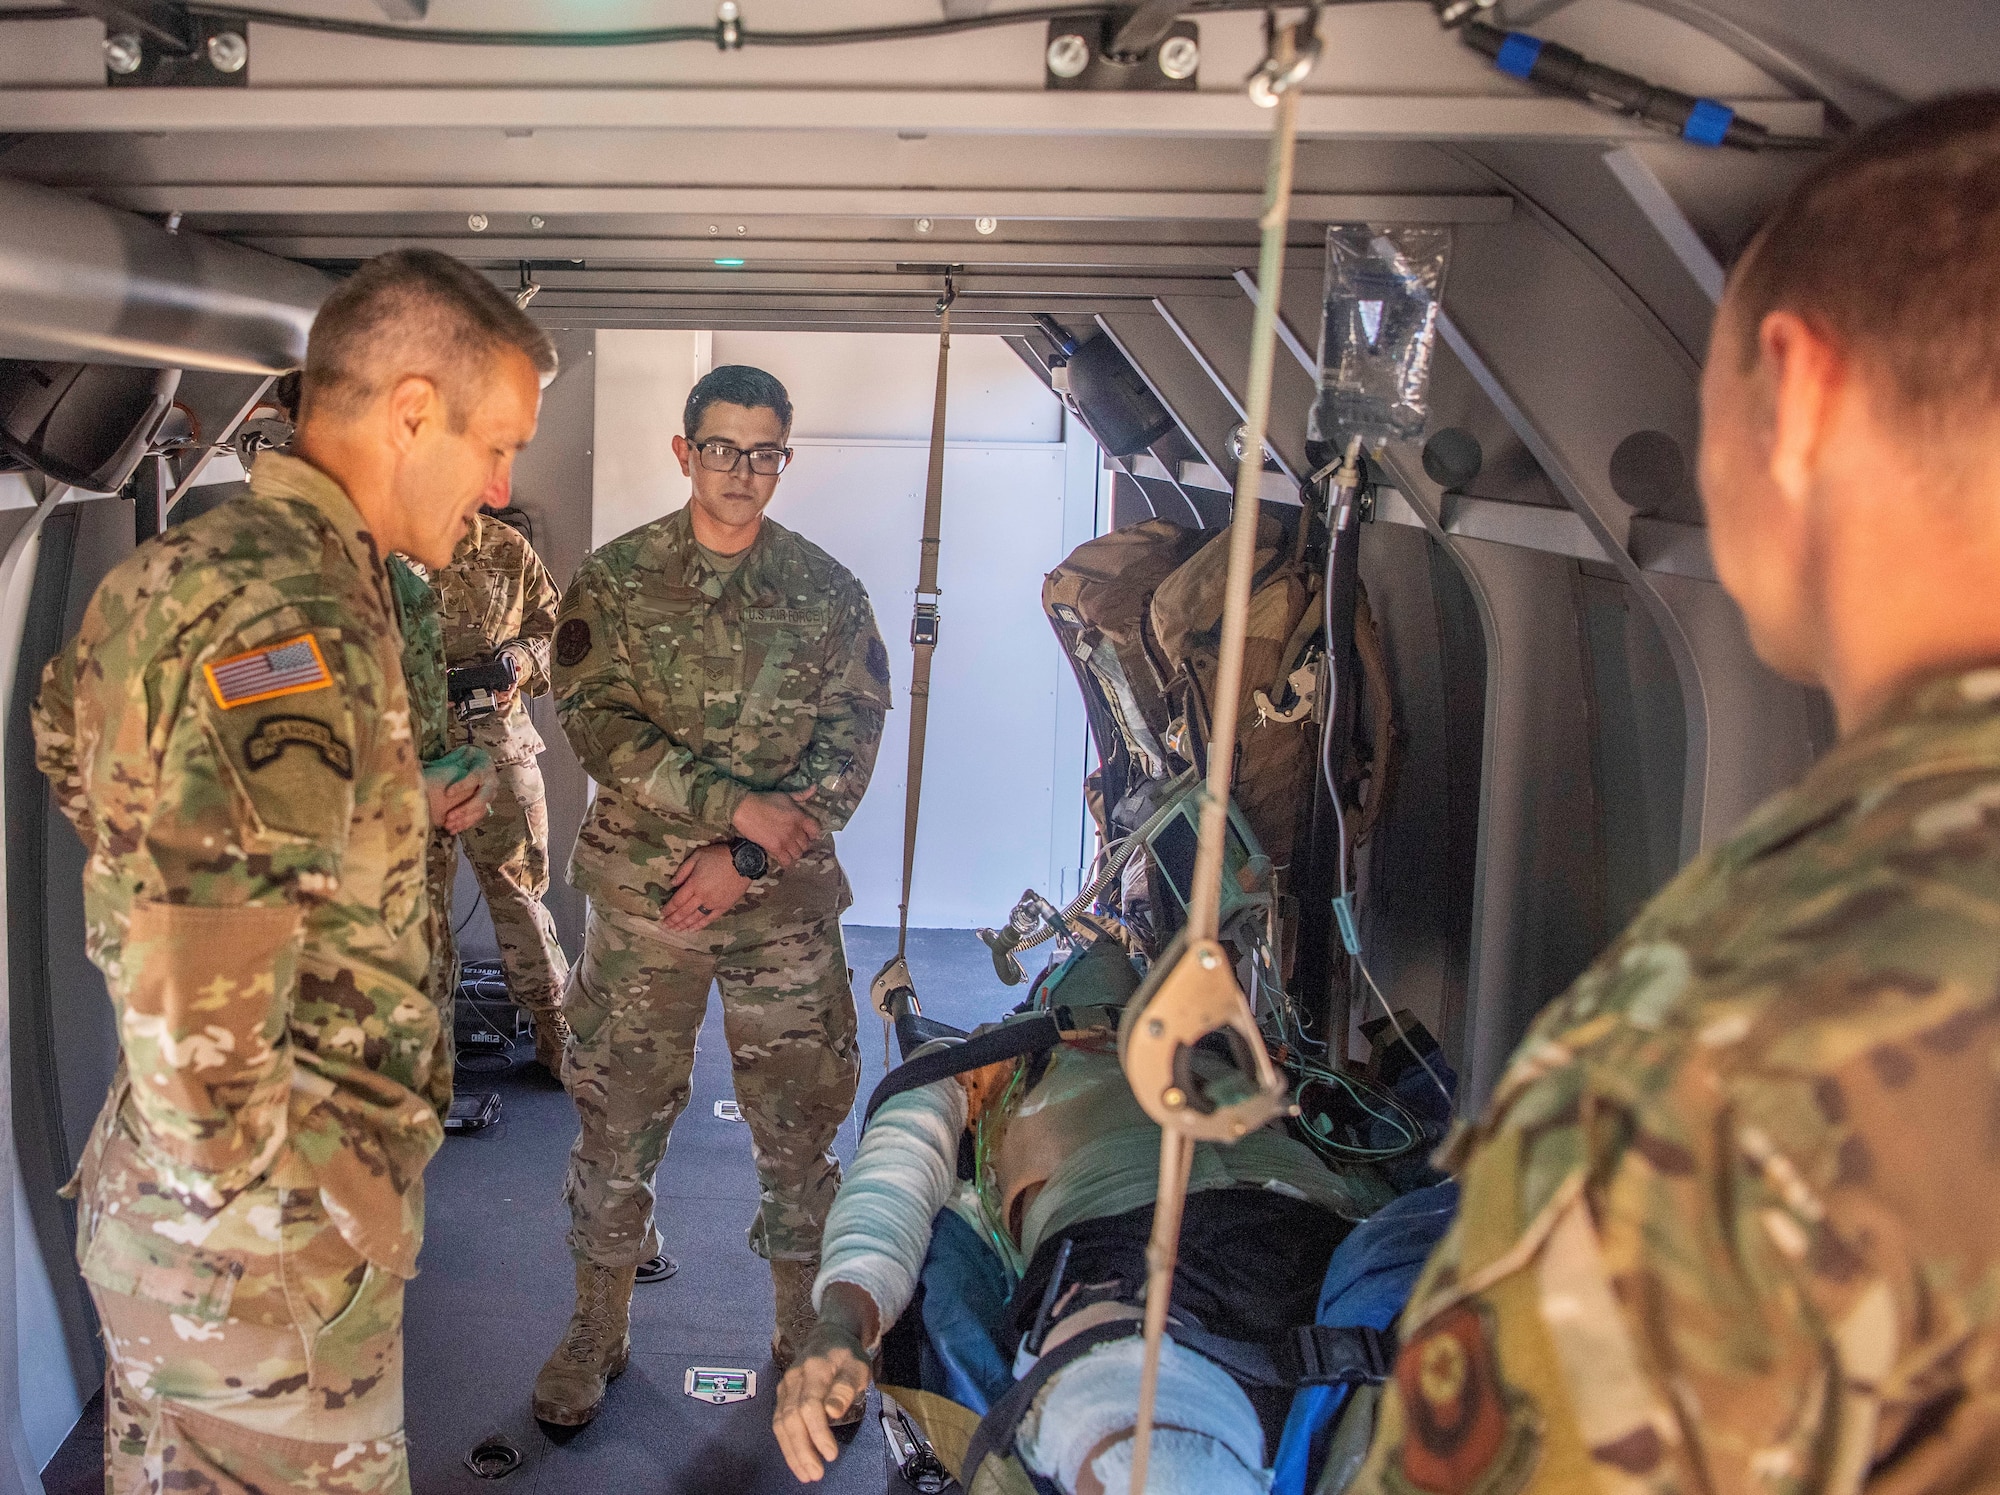 U.S. Army Gen. Richard D. Clarke, United States Special Operations Command commander, learns about a medical simulator 352nd Special Operations Wing Airmen train on at RAF Mildenhall, England, Sept. 12, 2019, during a site visit. 352nd SOW is the only AFSOC medical flight to have its own CV-22 Medical Simulator. (U.S. Air Force photo by Airman 1st Class Joseph Barron)